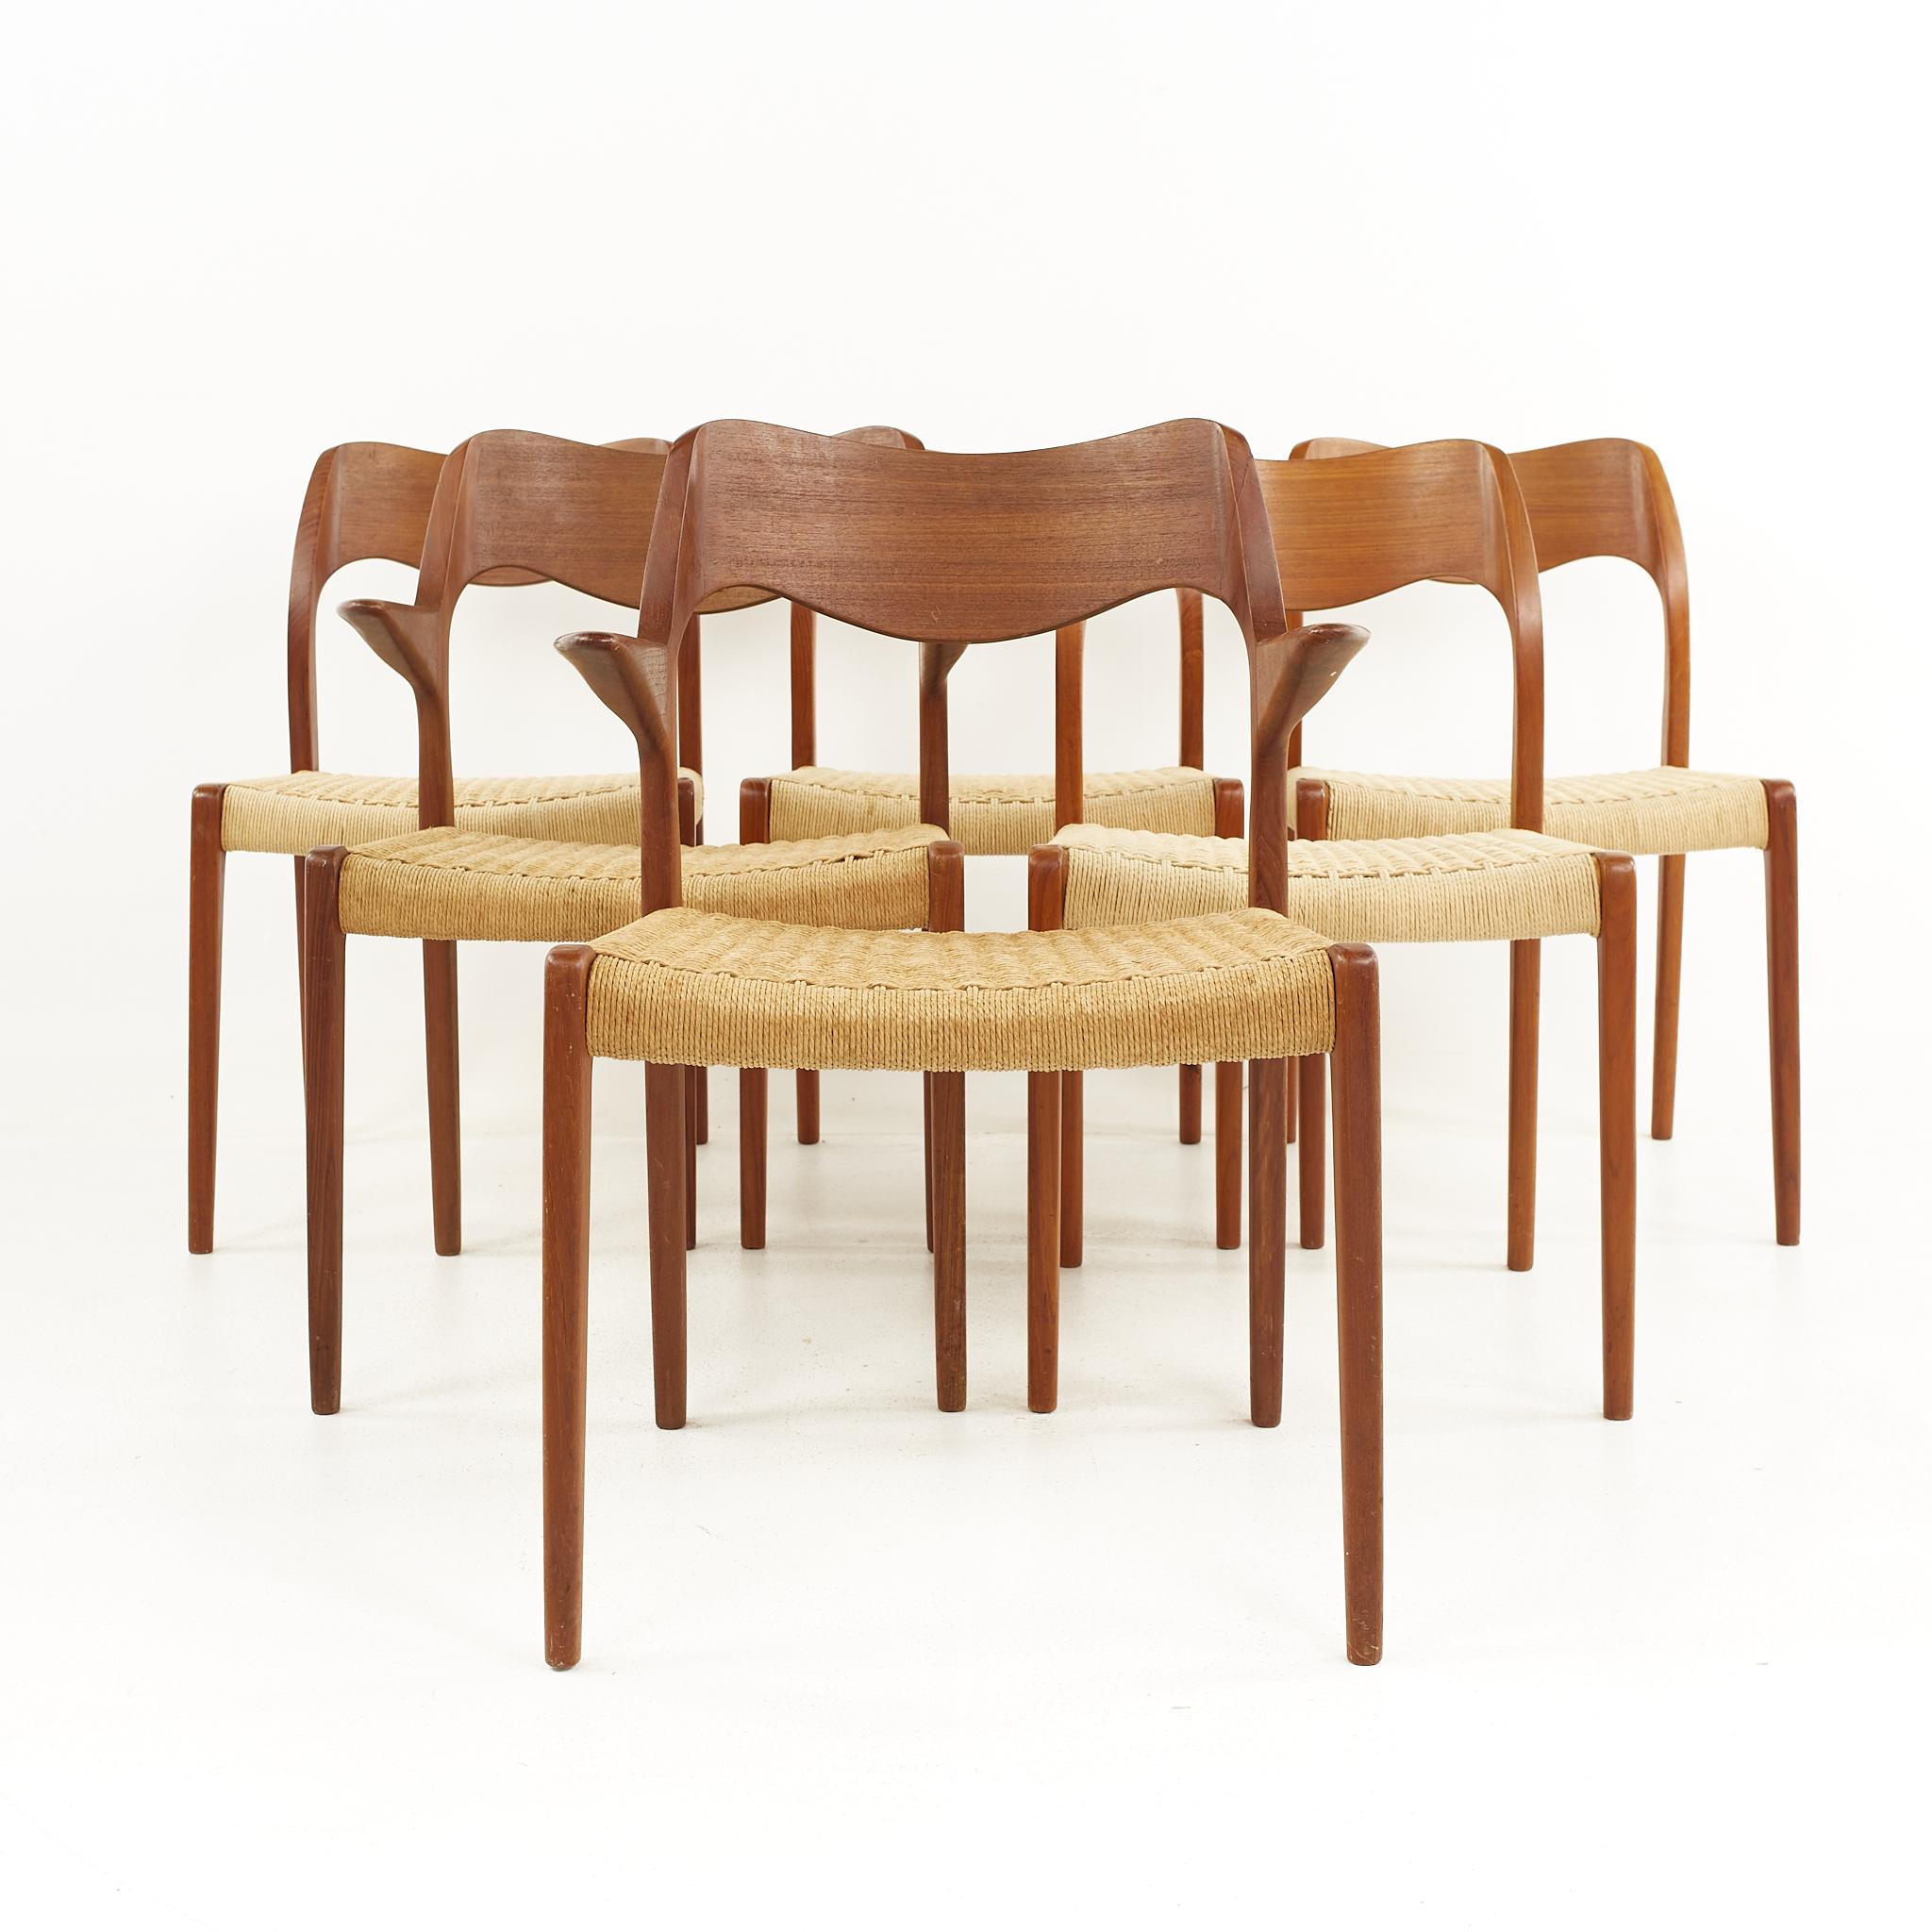 Niels Moller Model 71 mid century teak dining chairs - Set of 6 

Each chair measures: 19.5 wide x 19 deep x 31 high, with a seat height of 17.5 inches

All pieces of furniture can be had in what we call restored vintage condition. That means